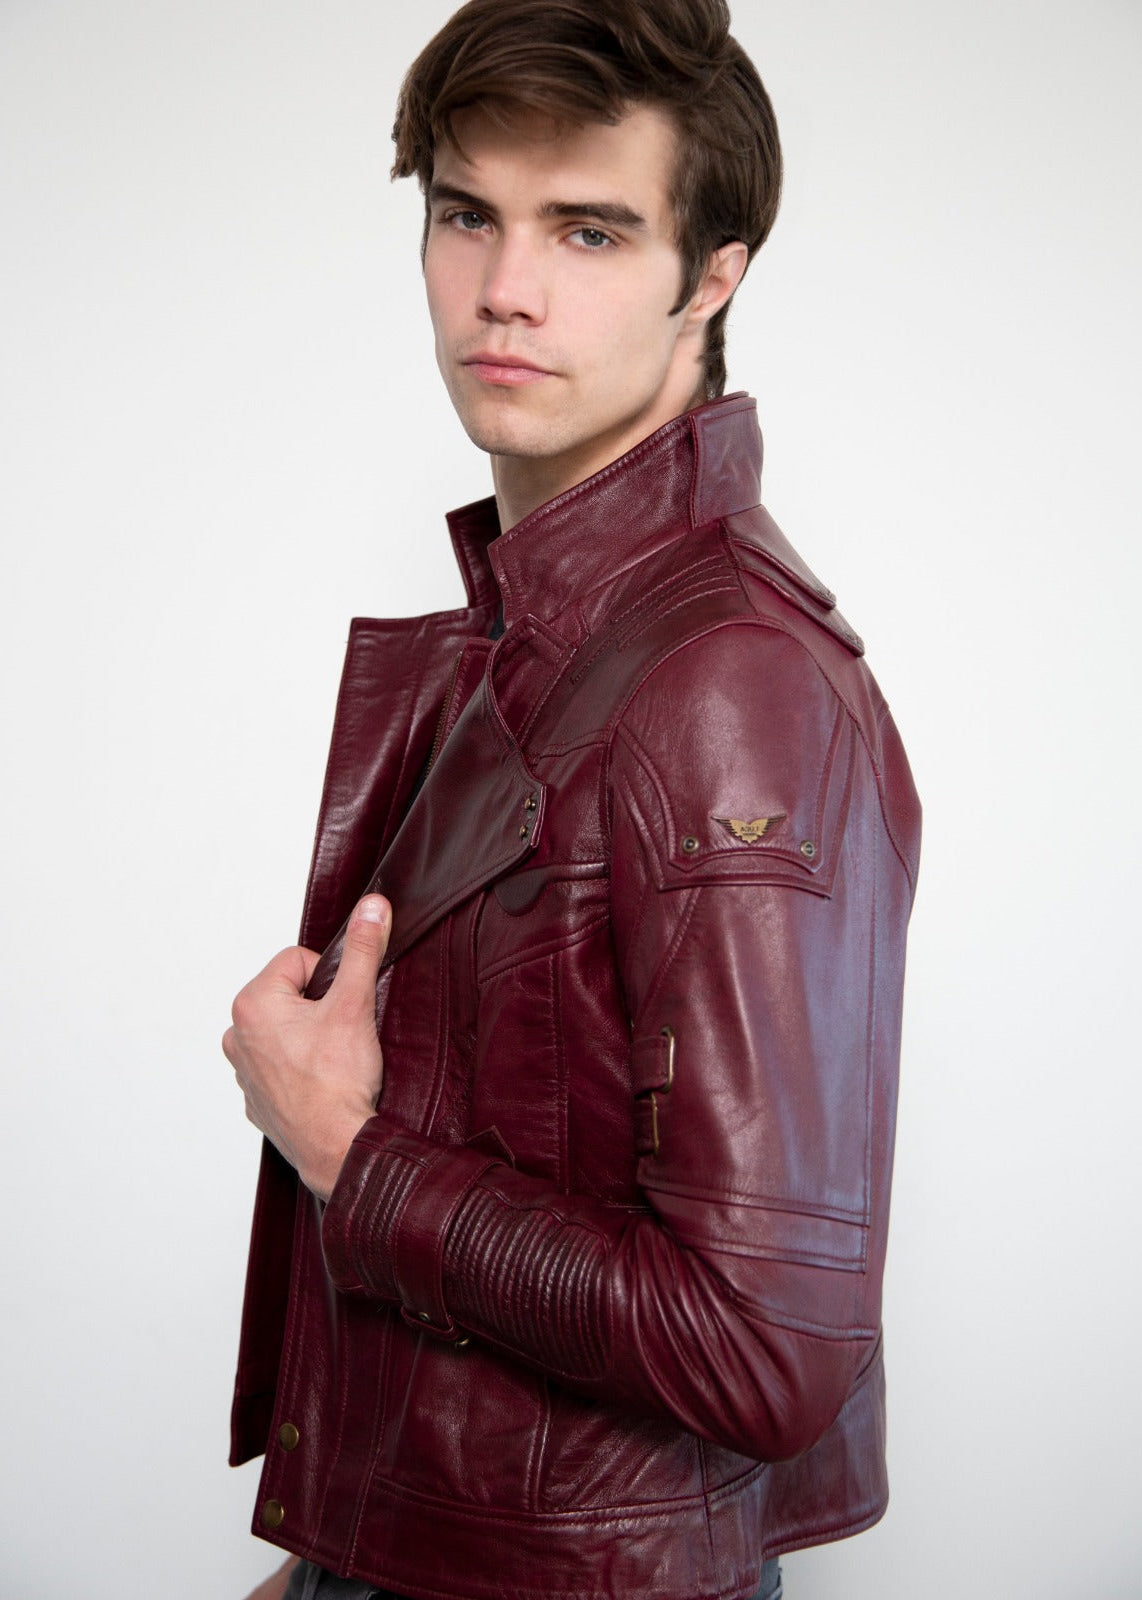 Star-Lord Guardians of the Galaxy Mens Leather Jacket